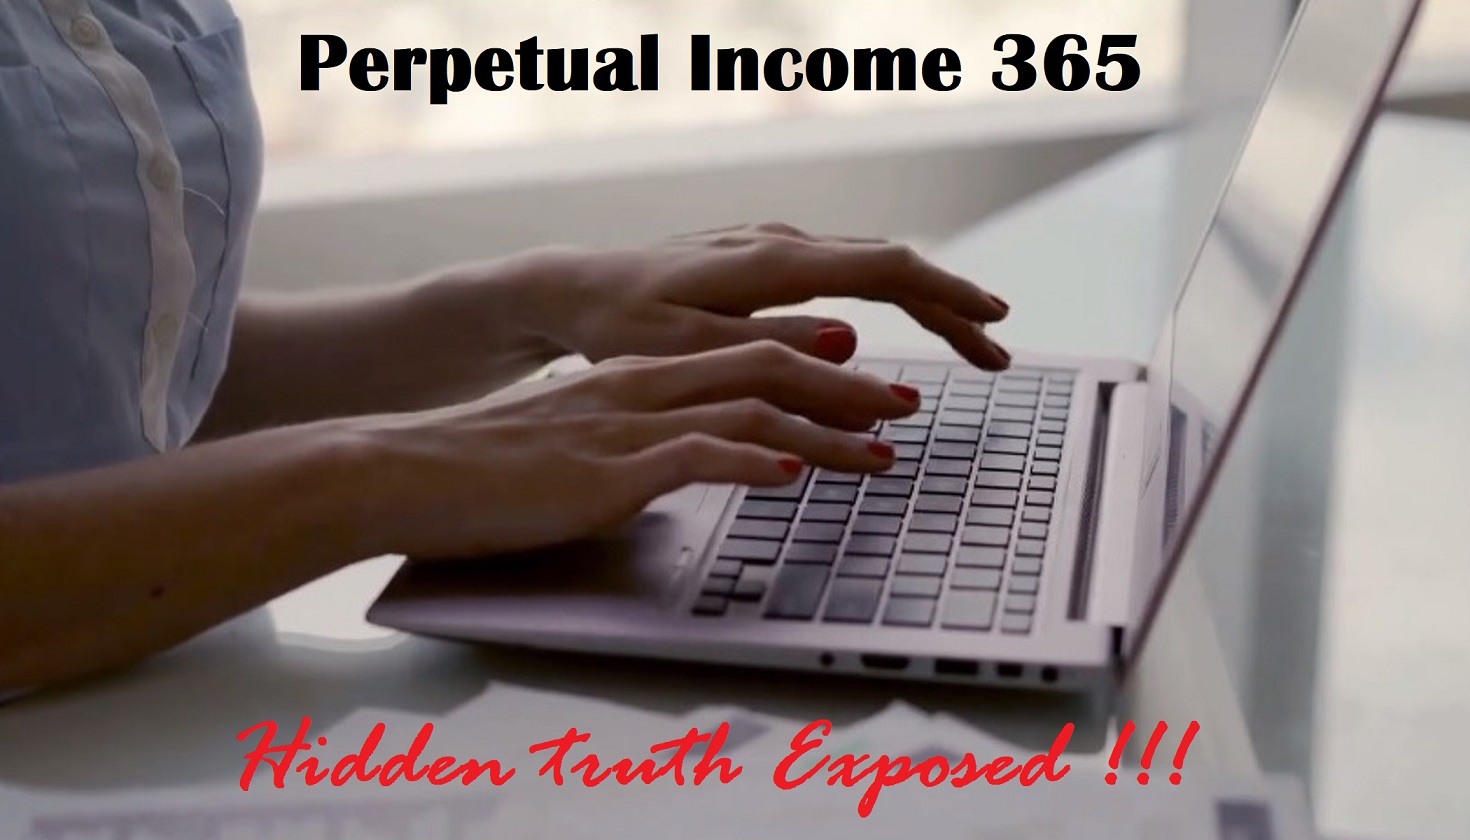 What is perpetual income 365